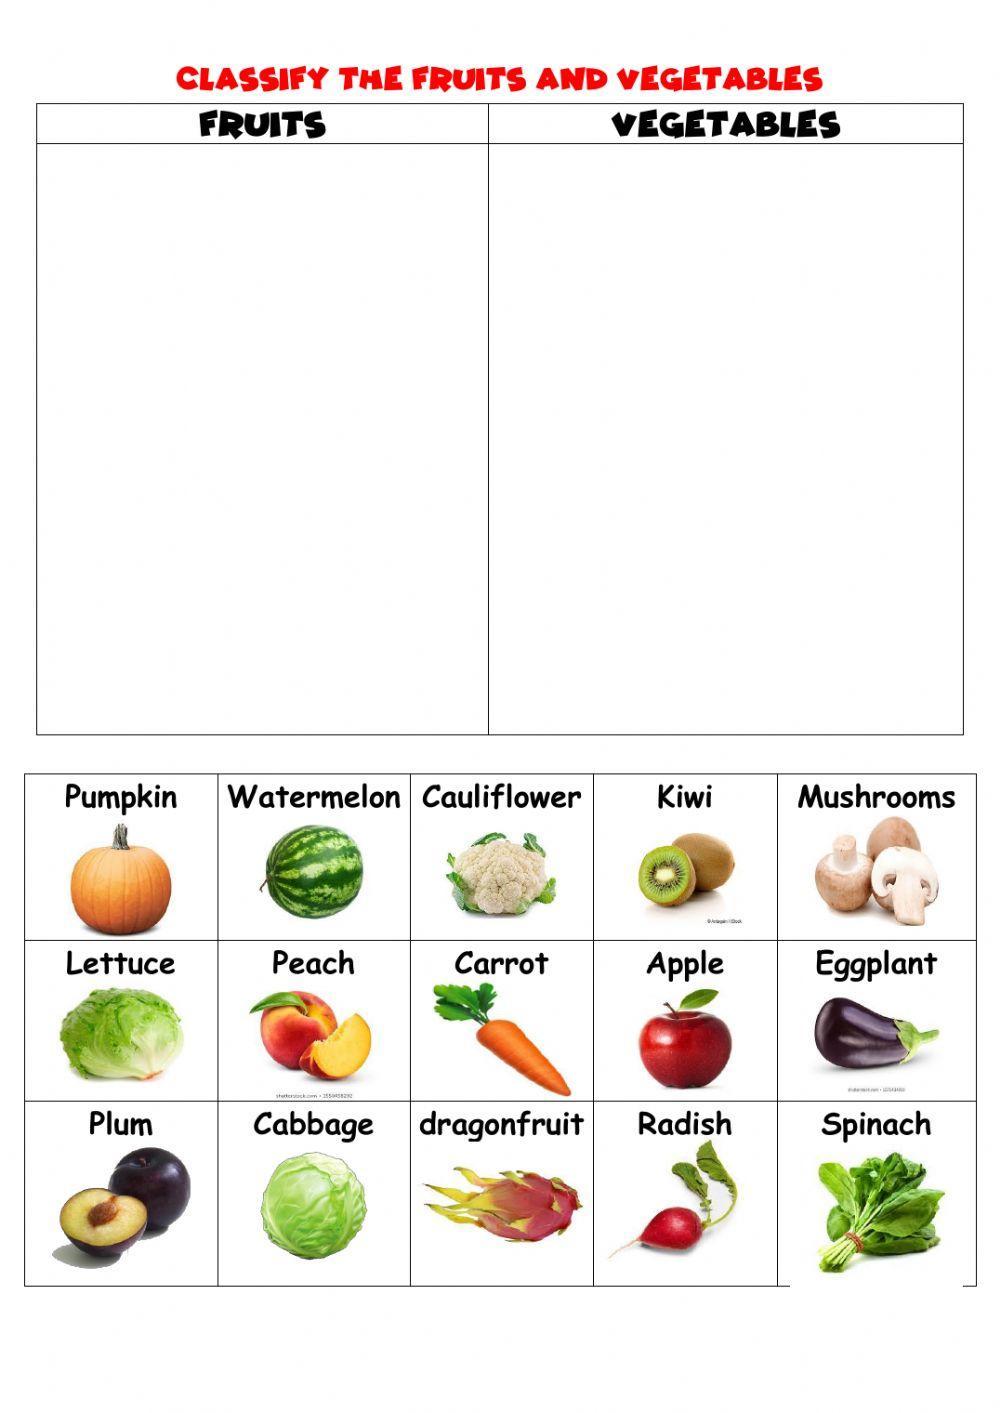 Fruits and vegetables classify